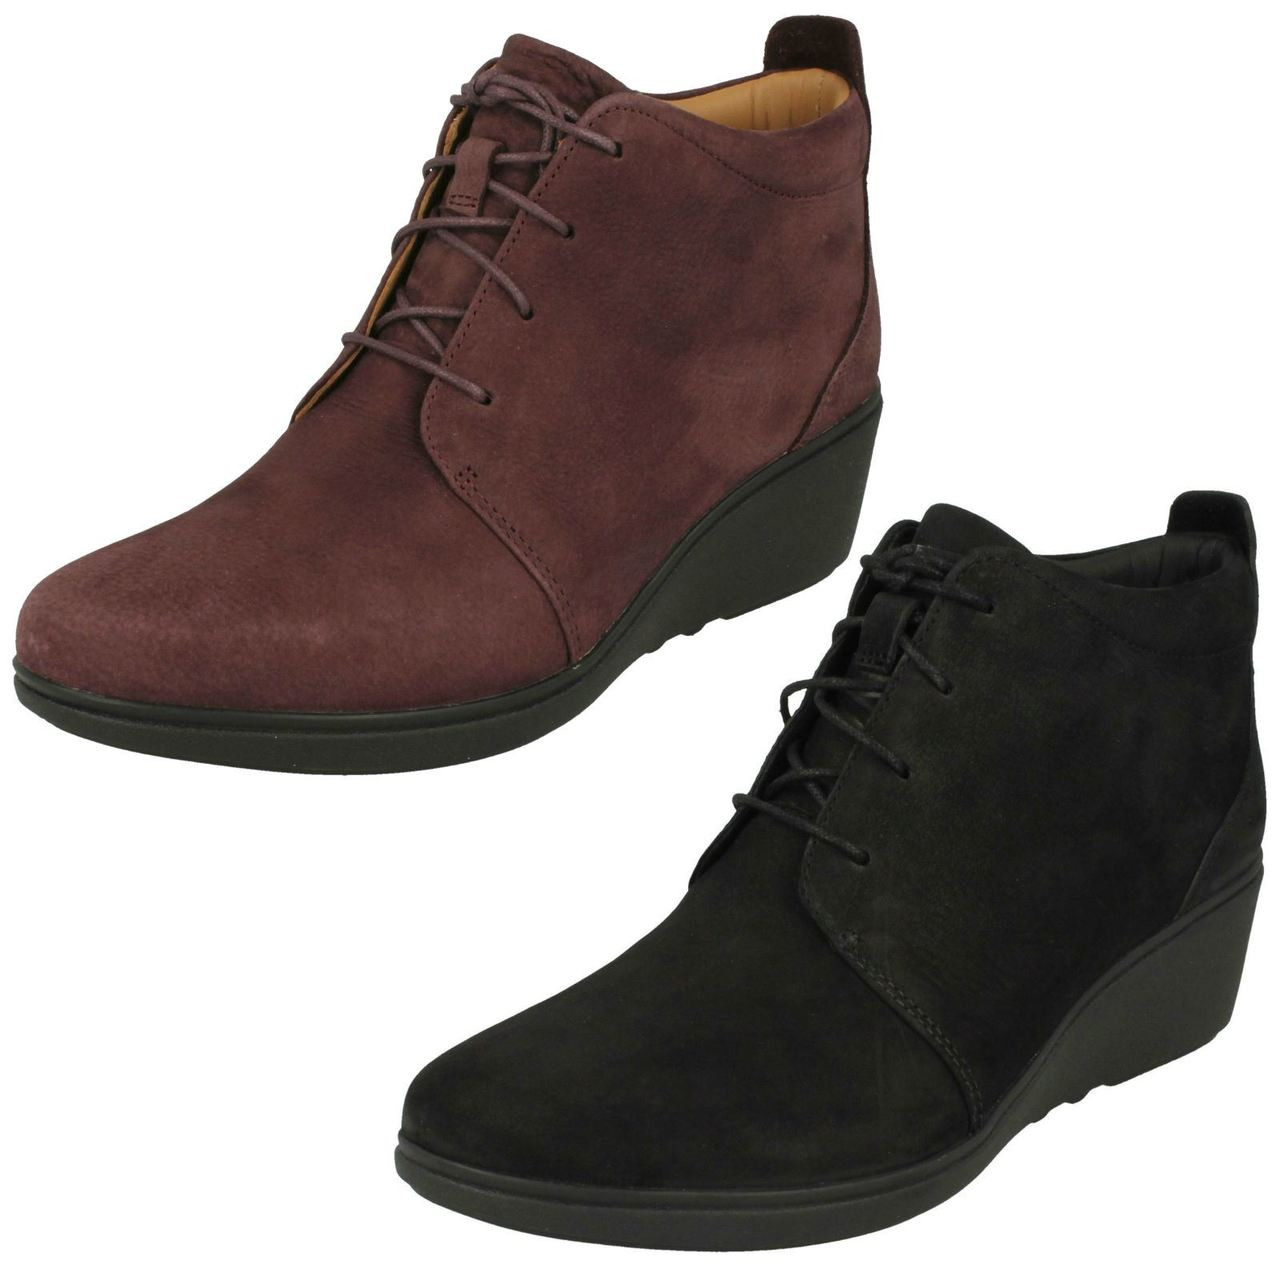 low heel clarks womens ankle boots